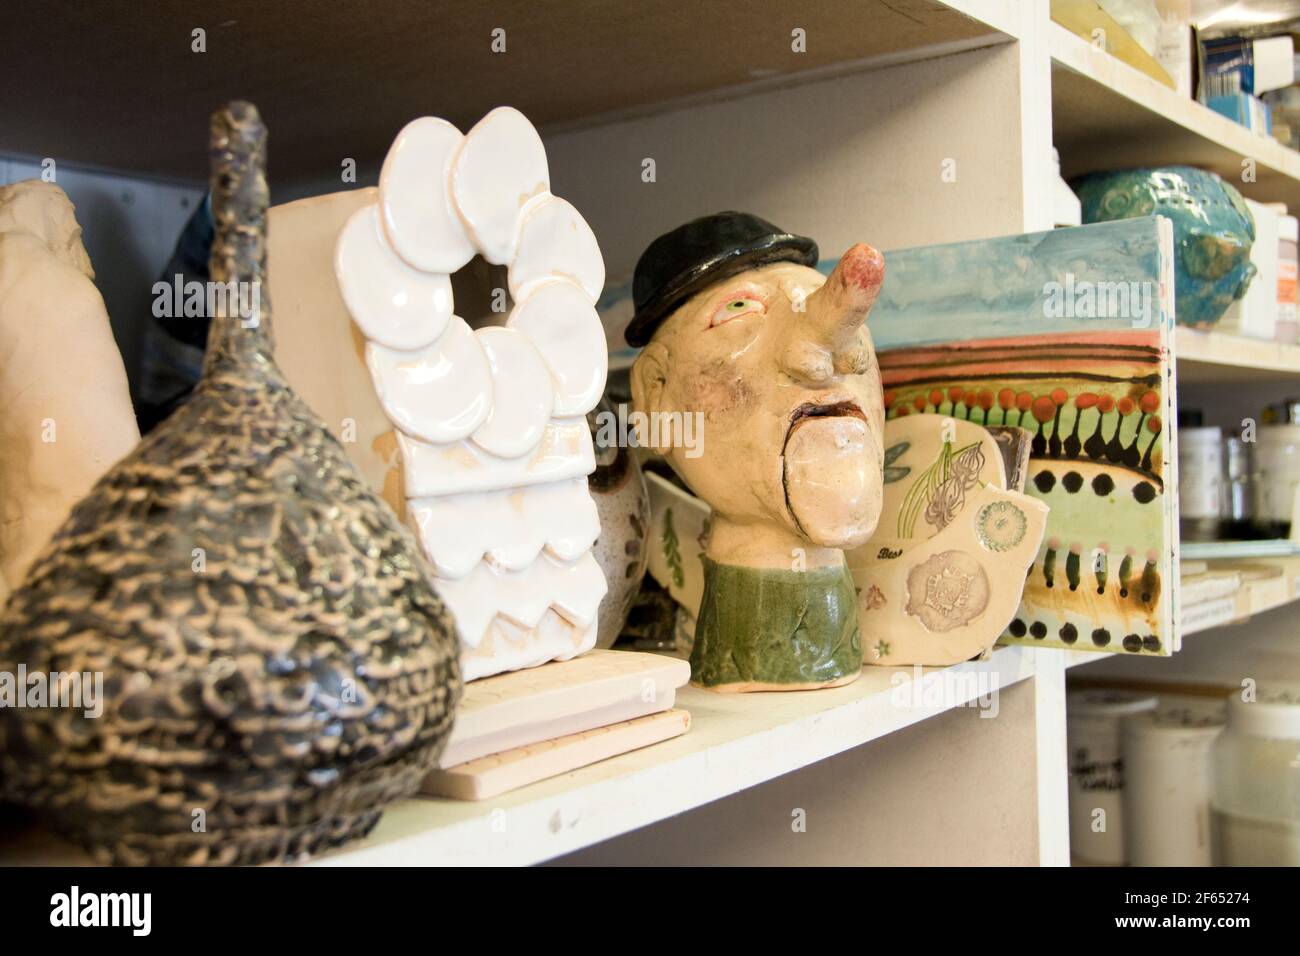 Leeds, UK- 26 July 2017 : Shelves crammed full of pottery creations at Inkwell Arts, a Leeds Mind drop in creative space at Chapel Allerton Stock Photo